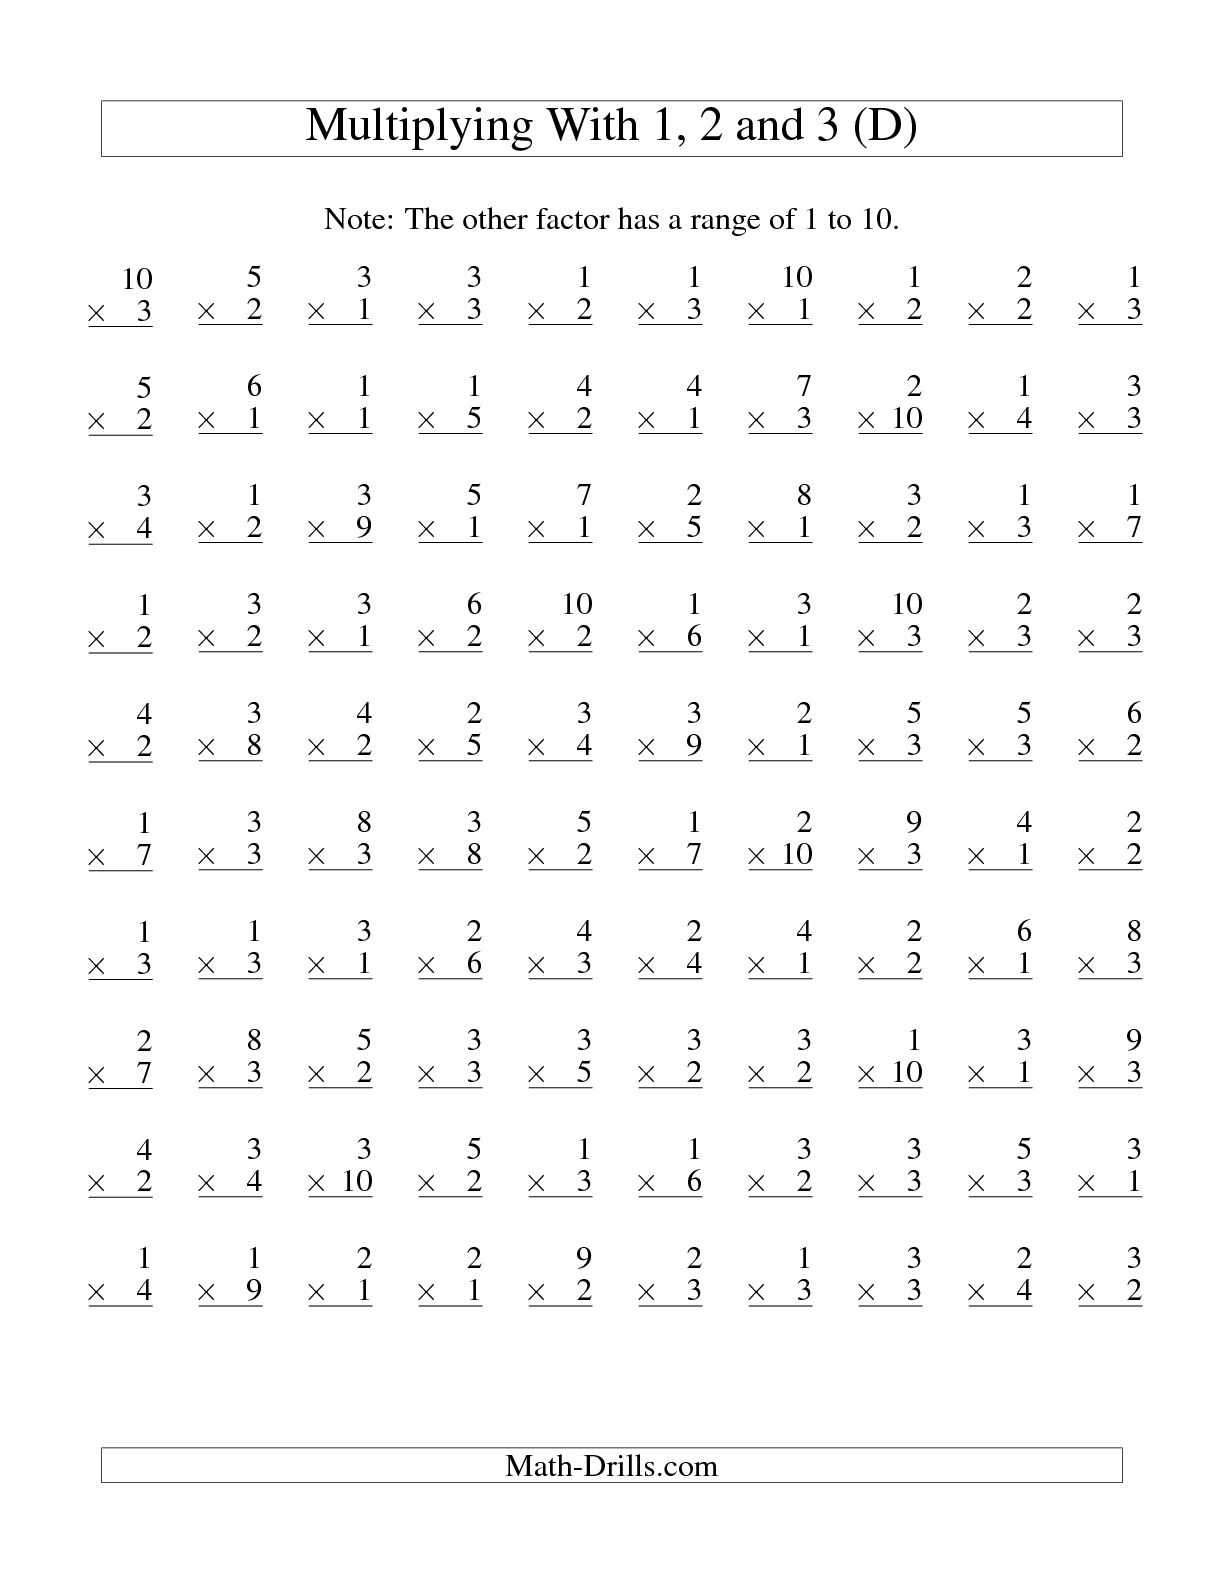 Chess Merit Badge Worksheet Along with Multiplication Facts Worksheets Free Worksheets for All